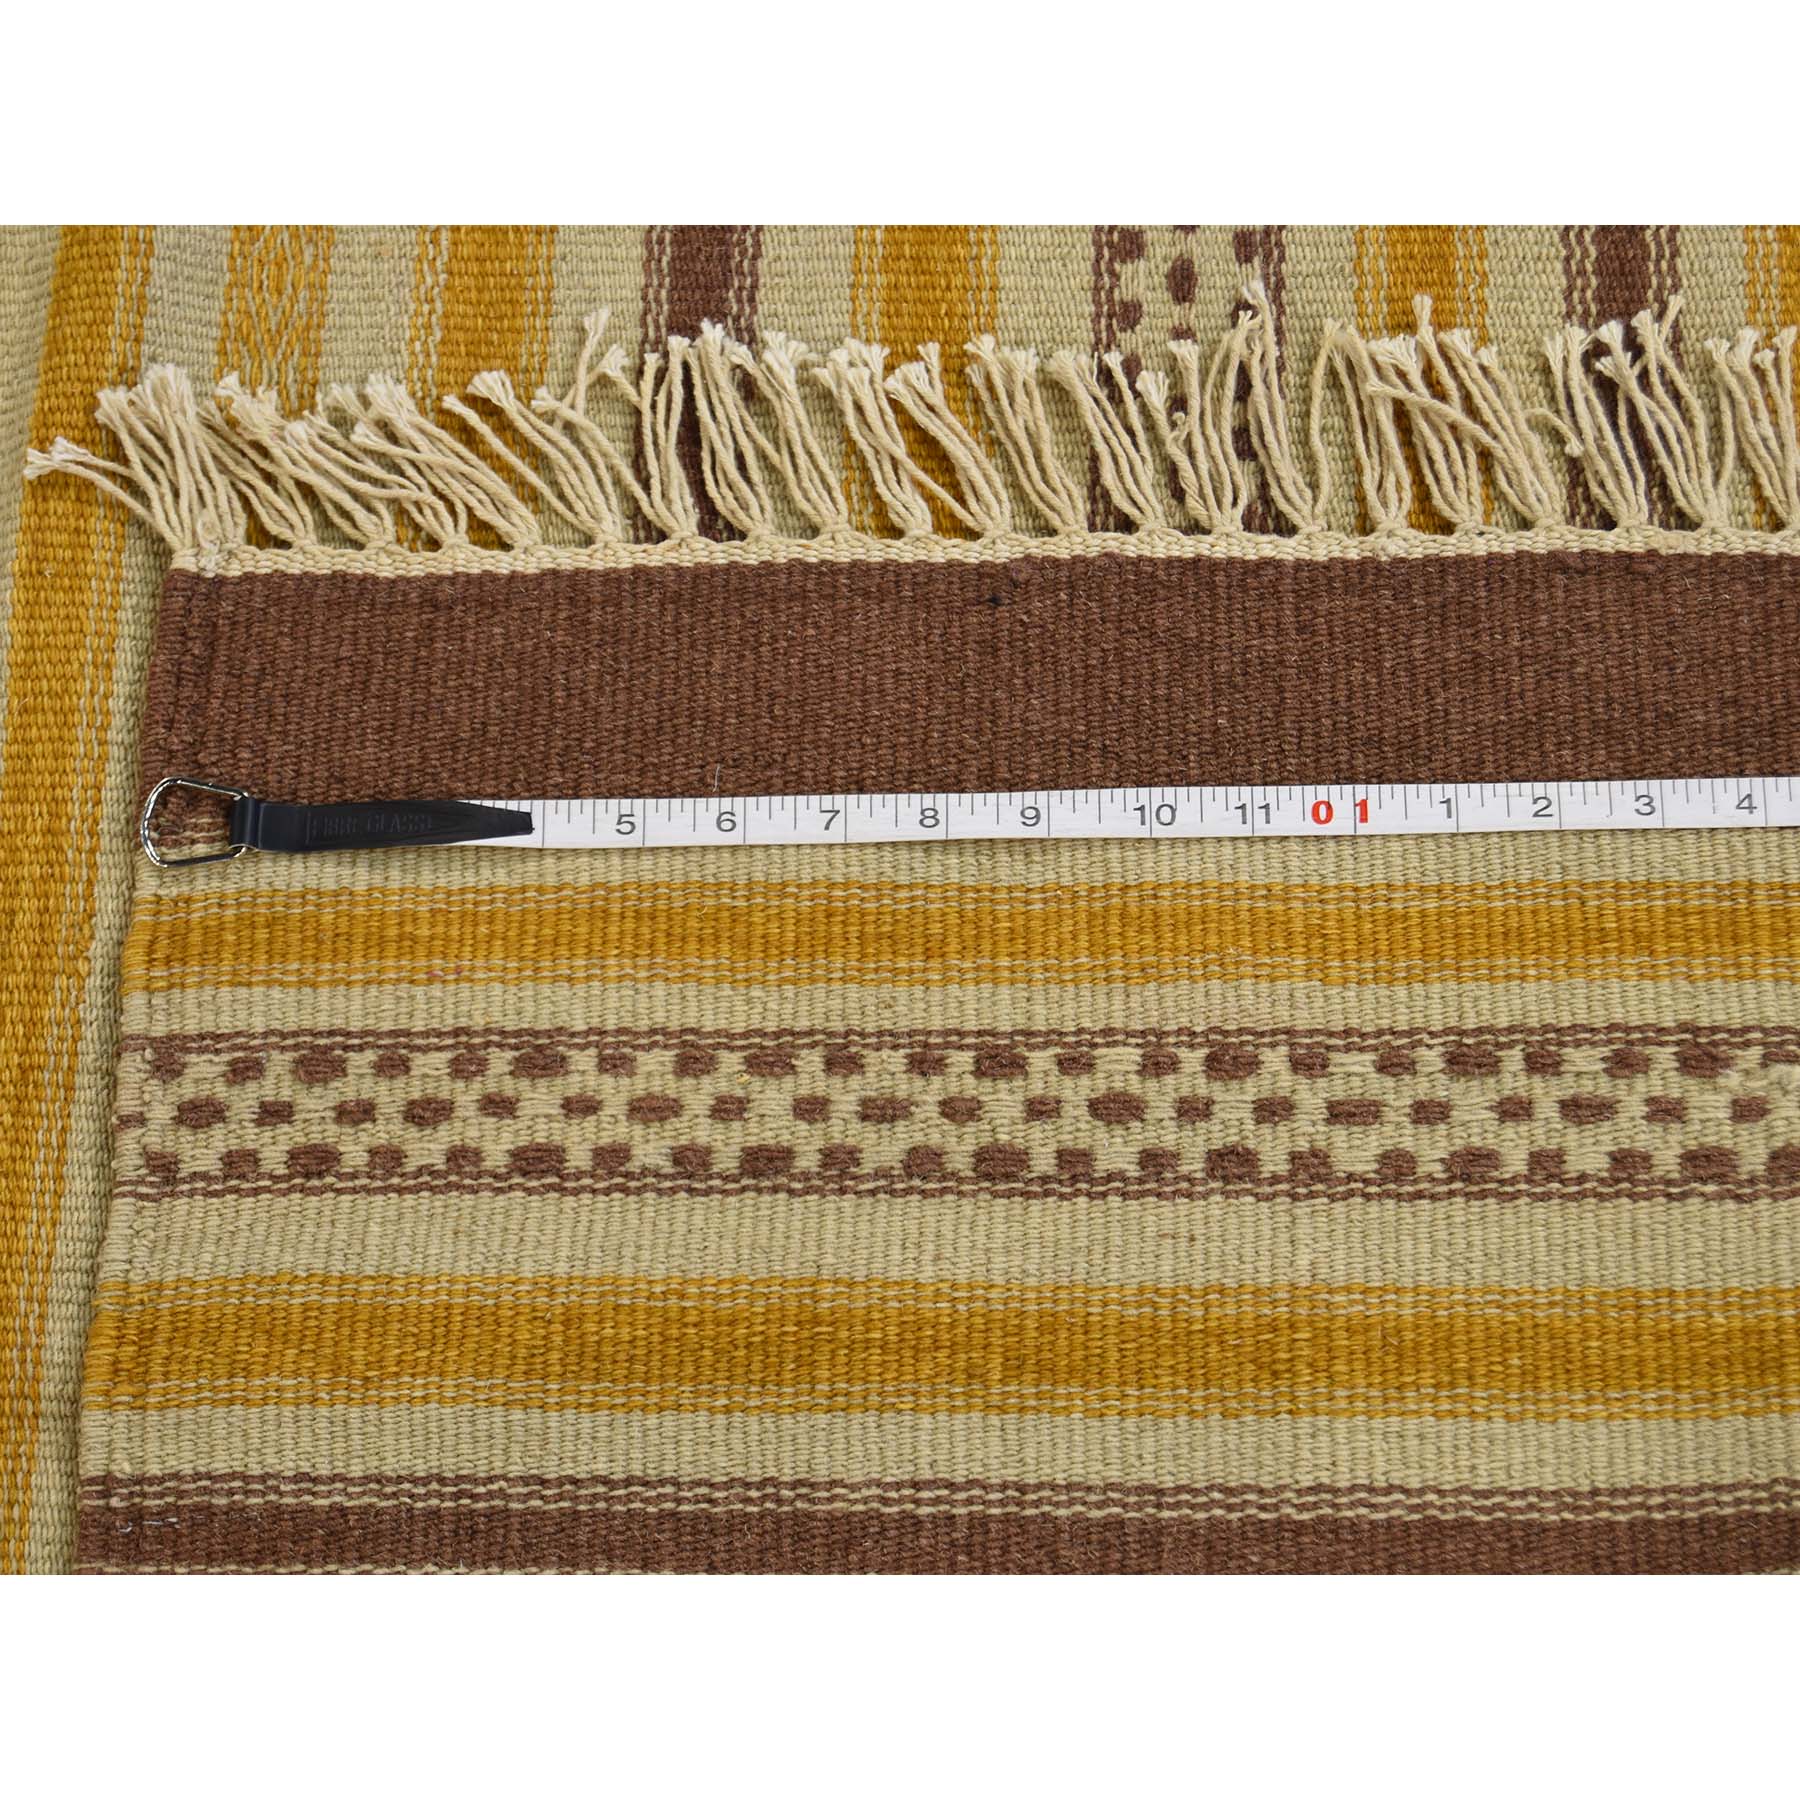 2-10--x5- Hand Woven Striped Durie Kilim Reversible Flat Weave Rug 